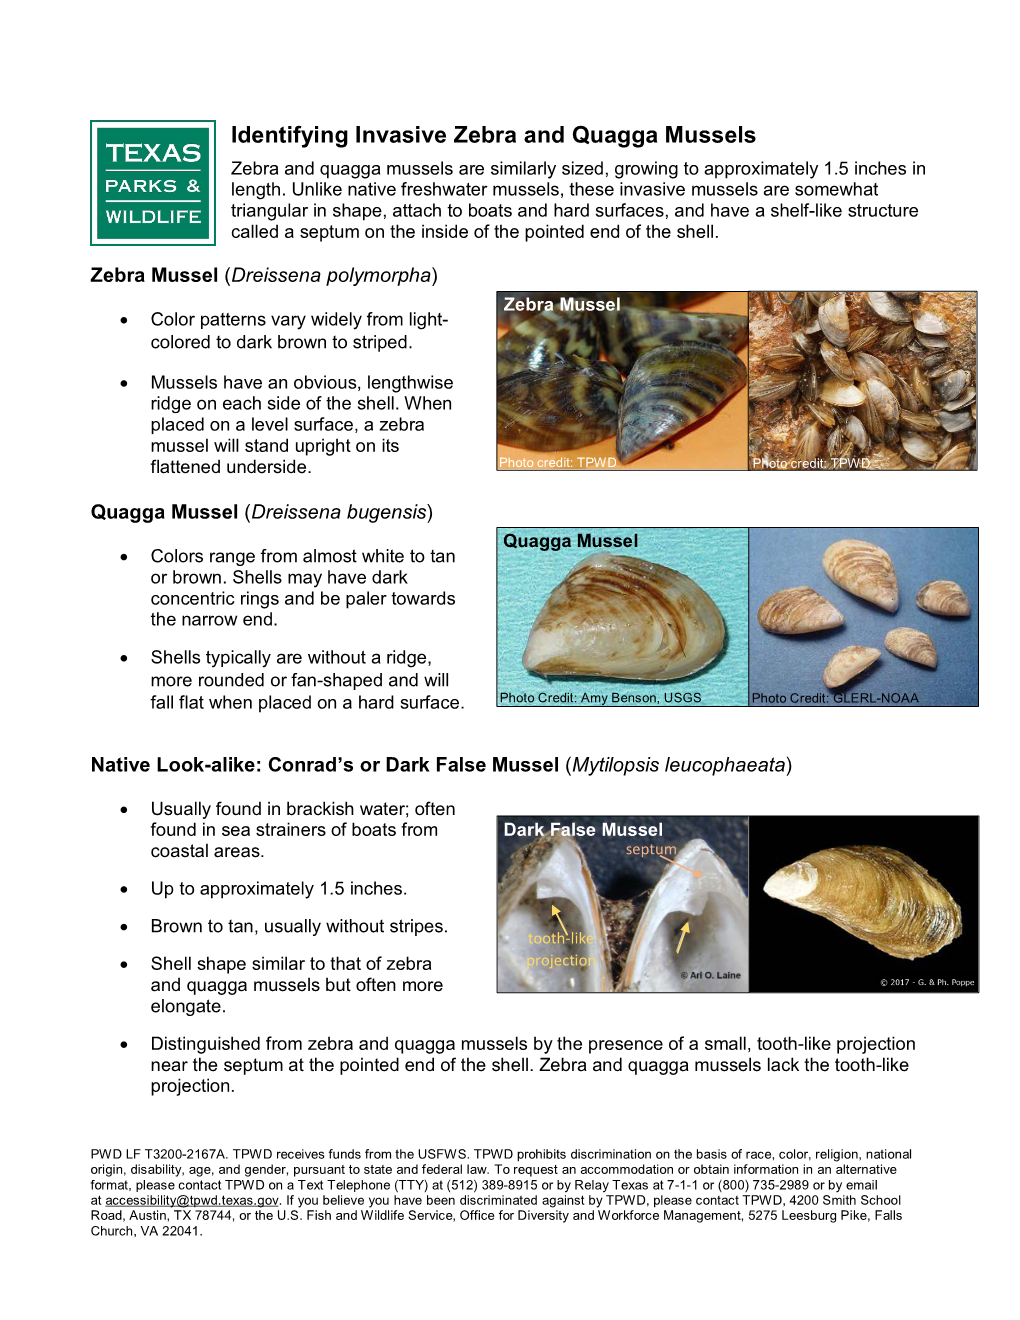 Identifying Invasive Zebra and Quagga Mussels Zebra and Quagga Mussels Are Similarly Sized, Growing to Approximately 1.5 Inches in Length